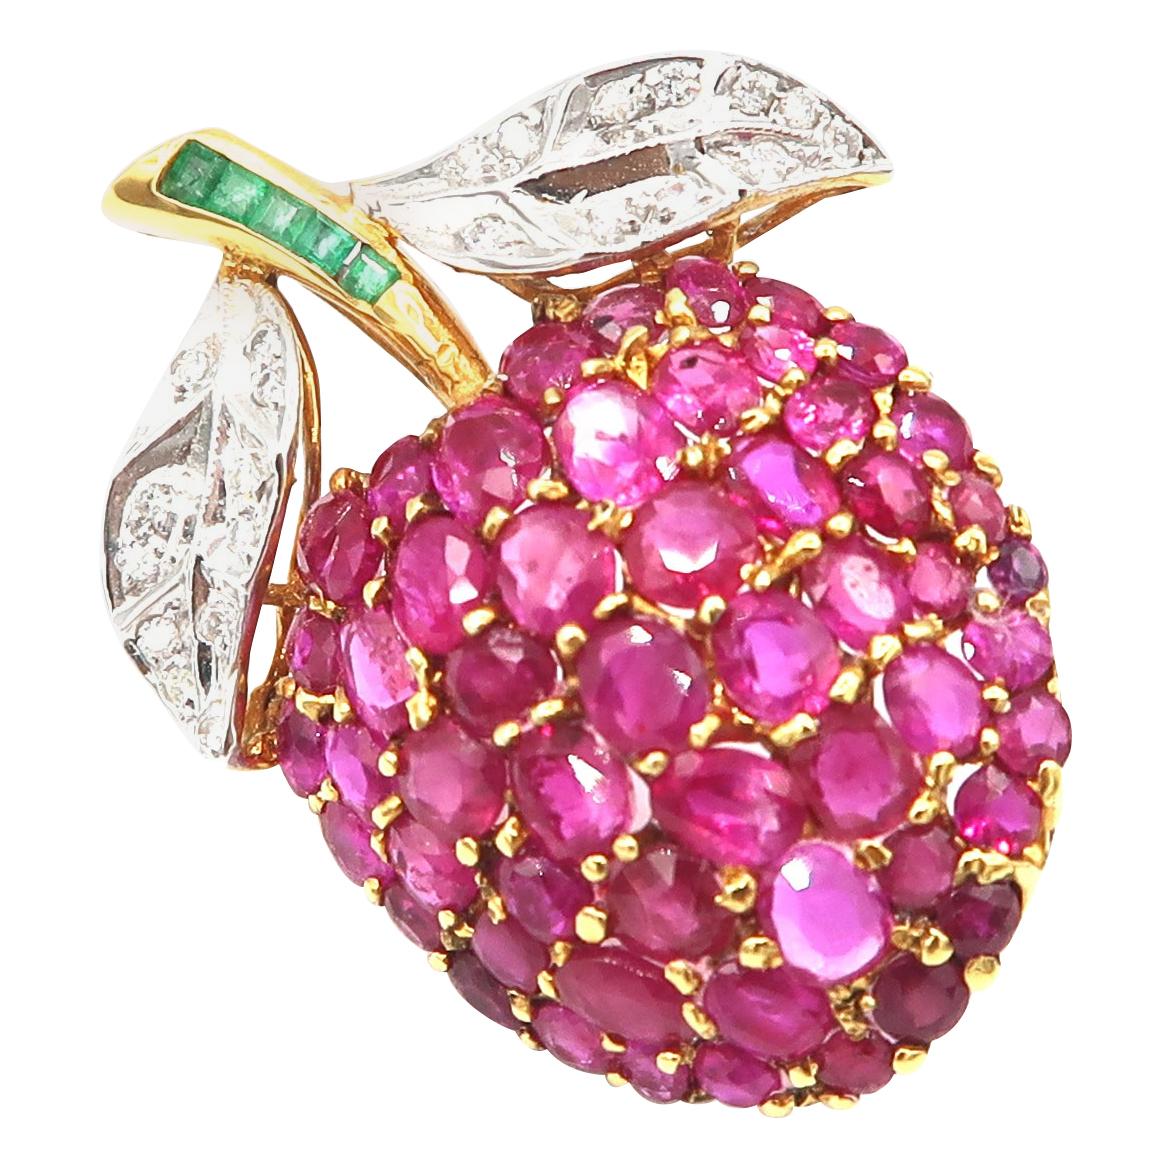 Boon Berry 15.5 Carat Ruby, Emerald and Diamond Gold Brooch